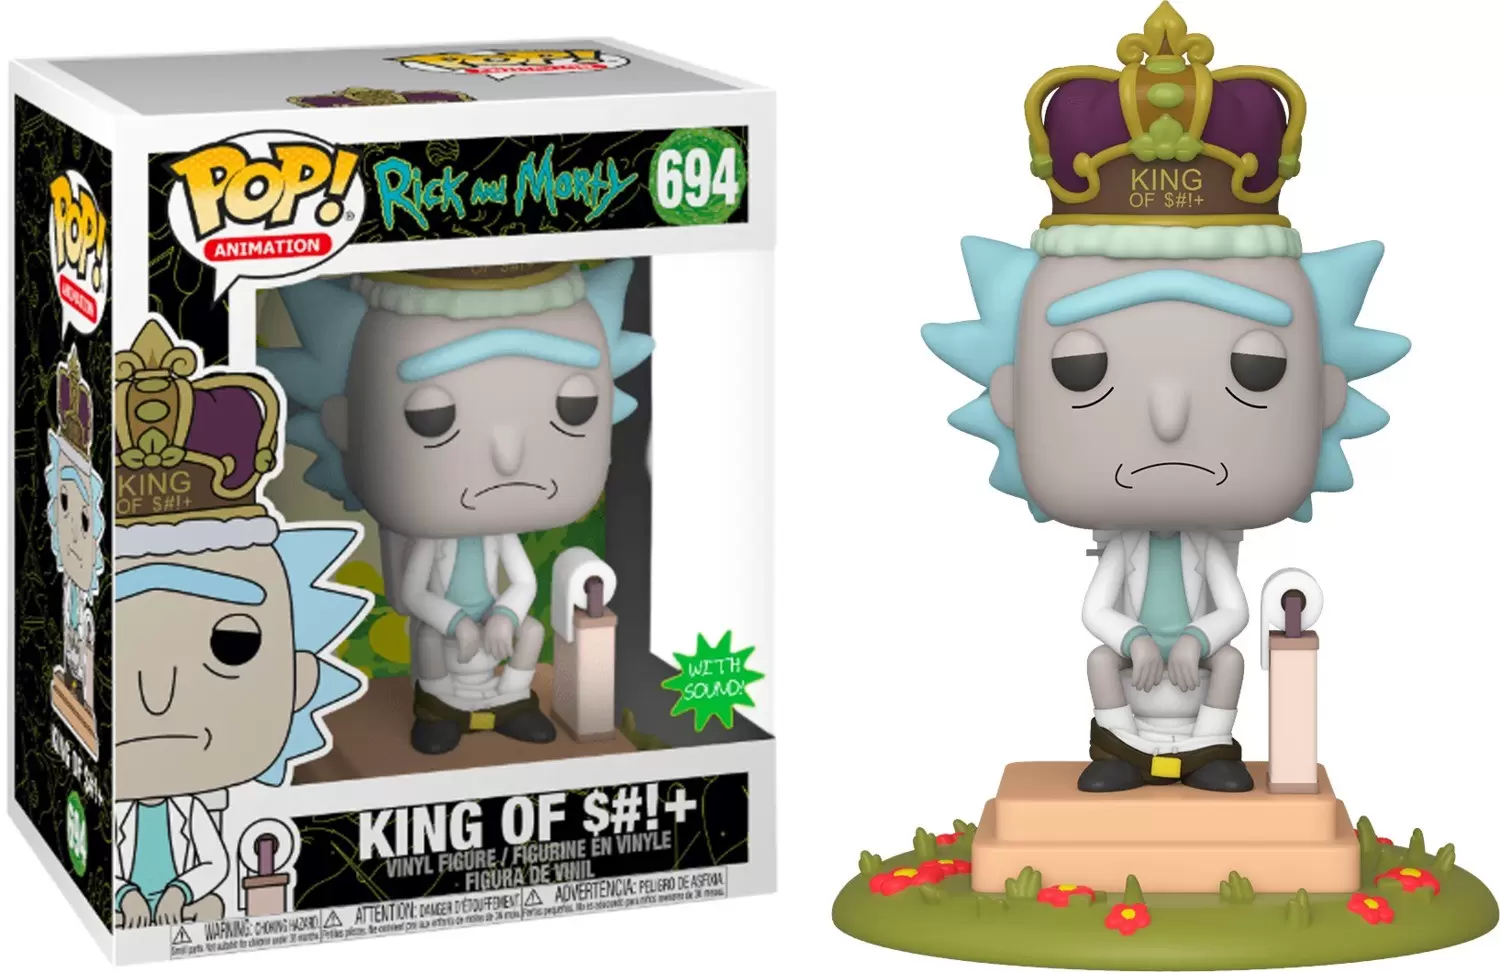 POP! Animation - Rick and Morty - King of $#!